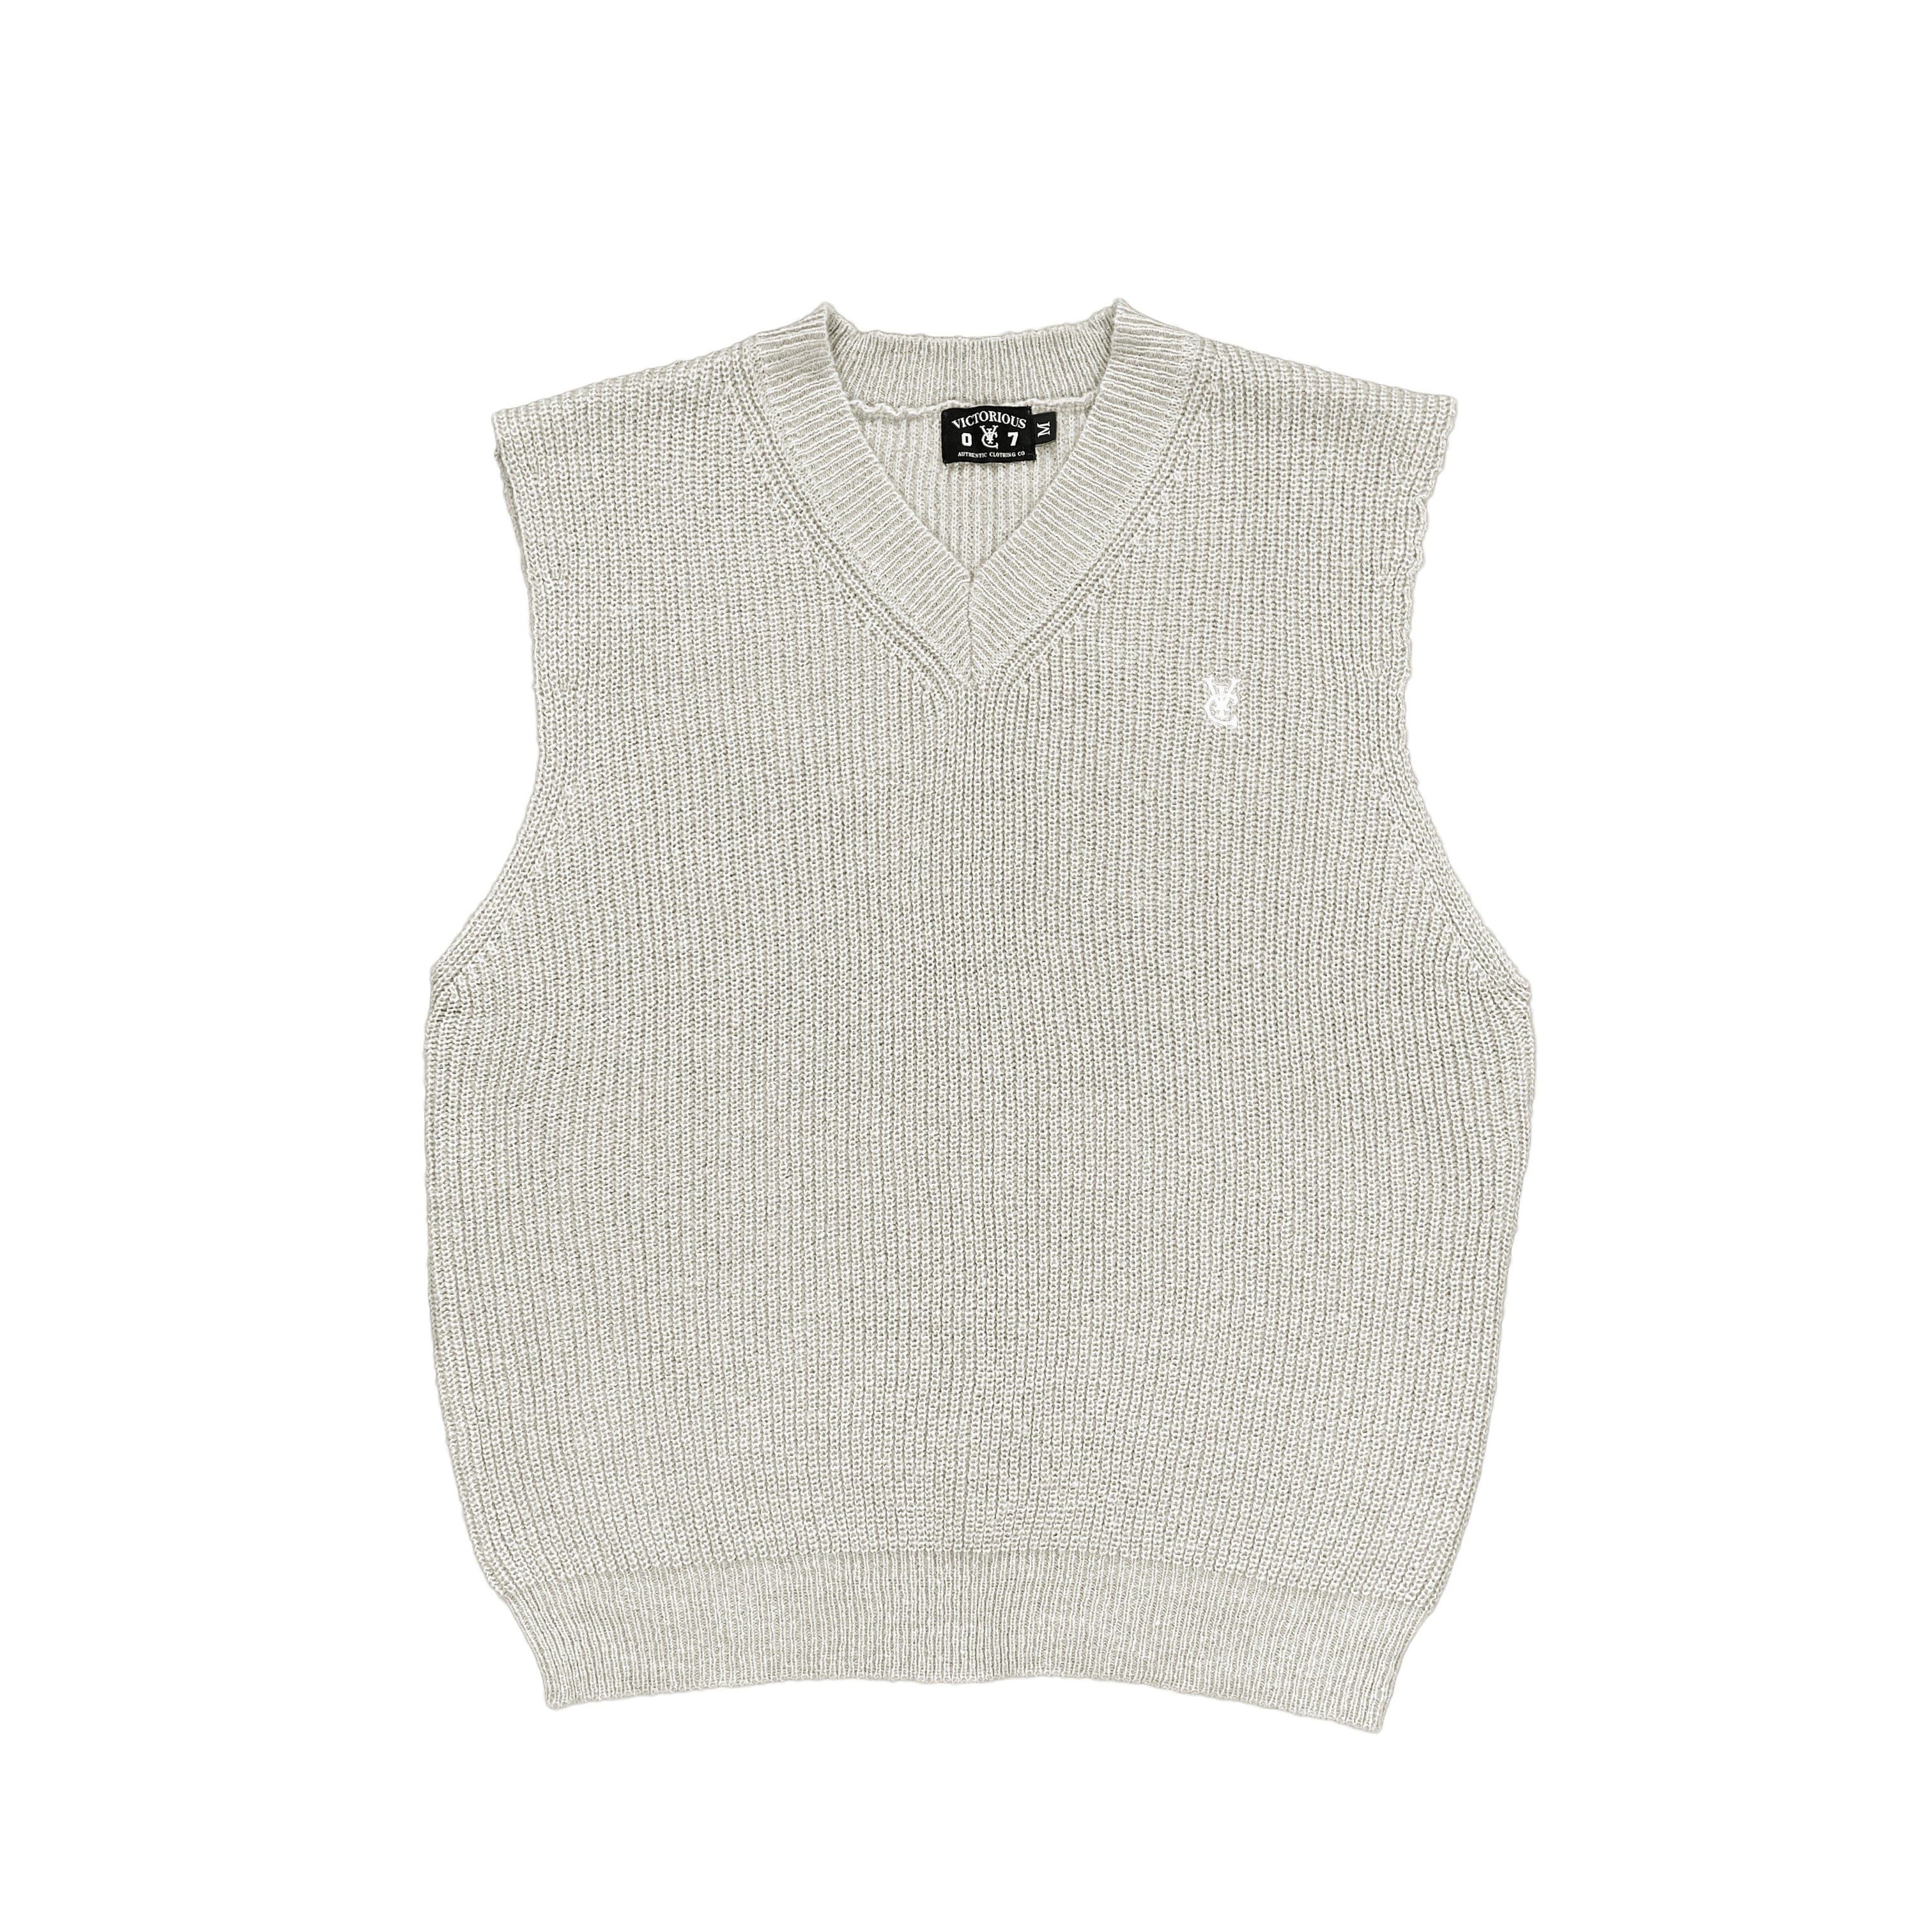 Premium quality mohair-blend knit vest sweater by New Zealand skate and streetwear clothing label VIC Apparel. Classic minimal design. Regular fit.